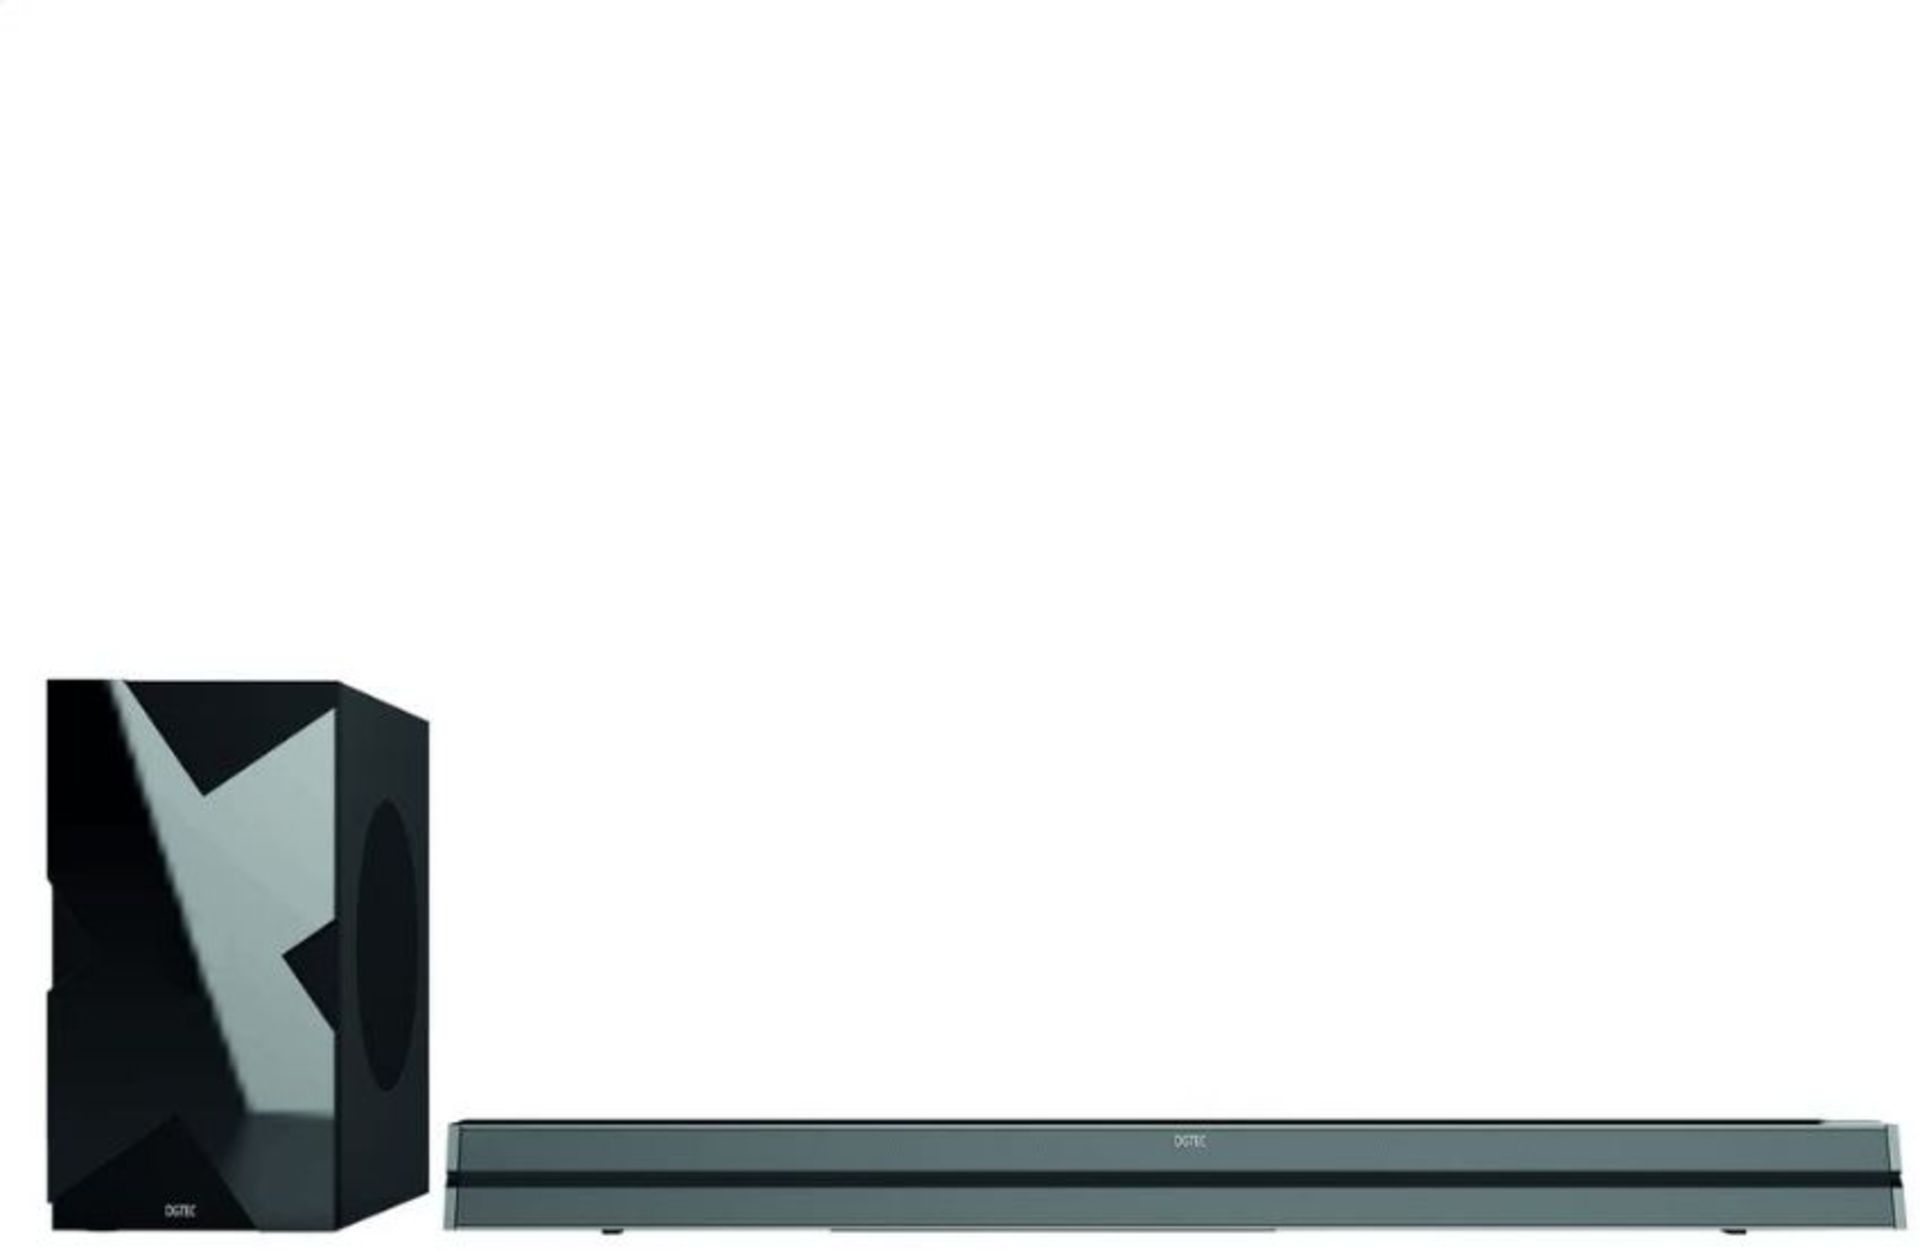 (M64)DGTec FS18S 140 W Bluetooth Device Streaming 2.1 Channel Soundbar/Wired Subwoofer - Black ... - Image 2 of 2